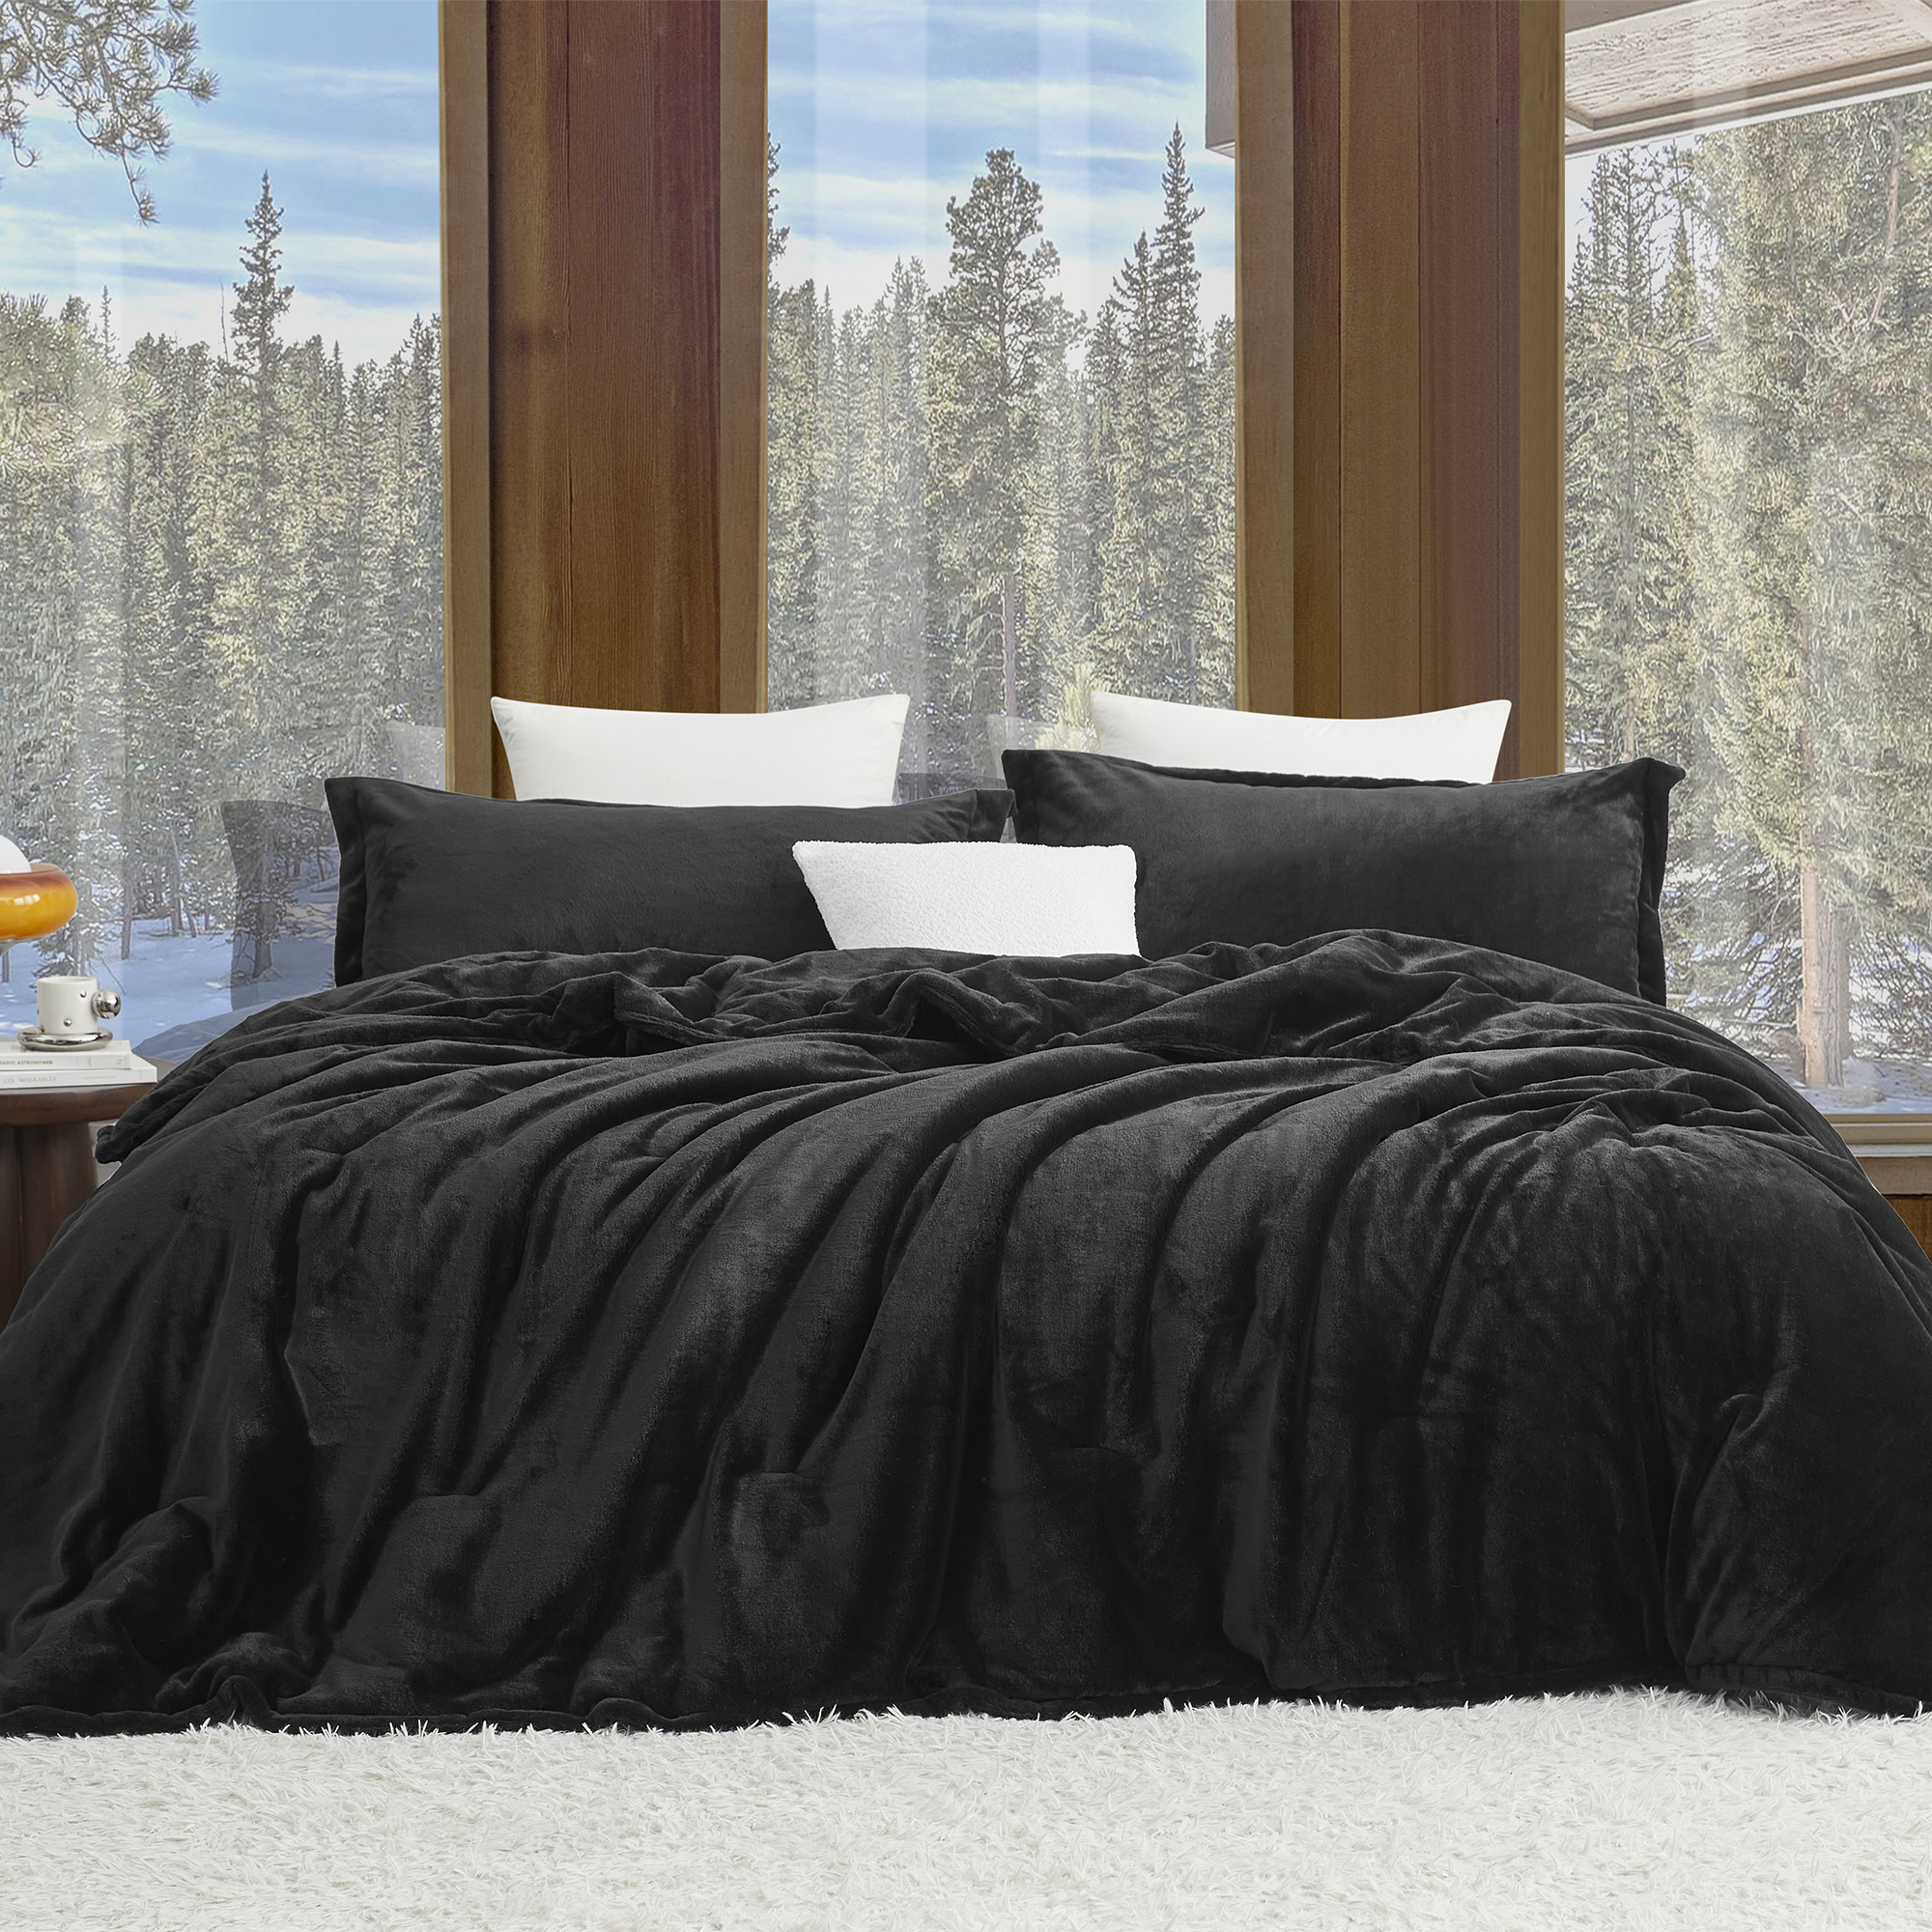 Softer than Soft - Coma Inducer® Oversized Comforter - Black